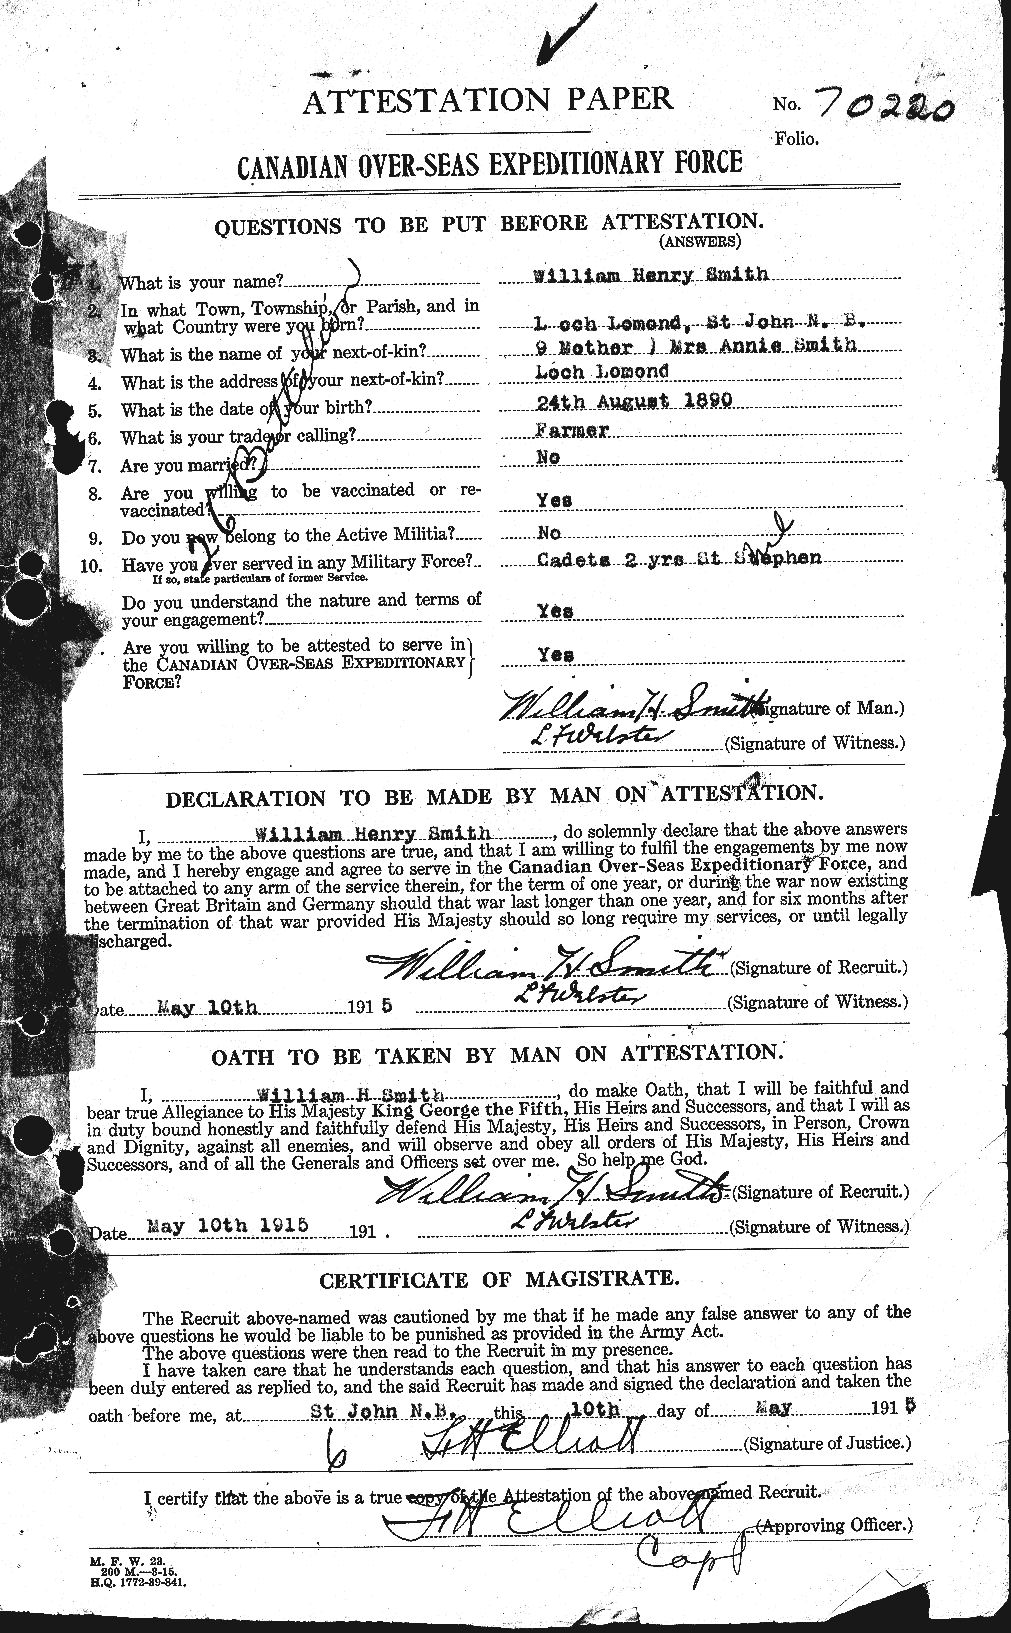 Personnel Records of the First World War - CEF 109279a